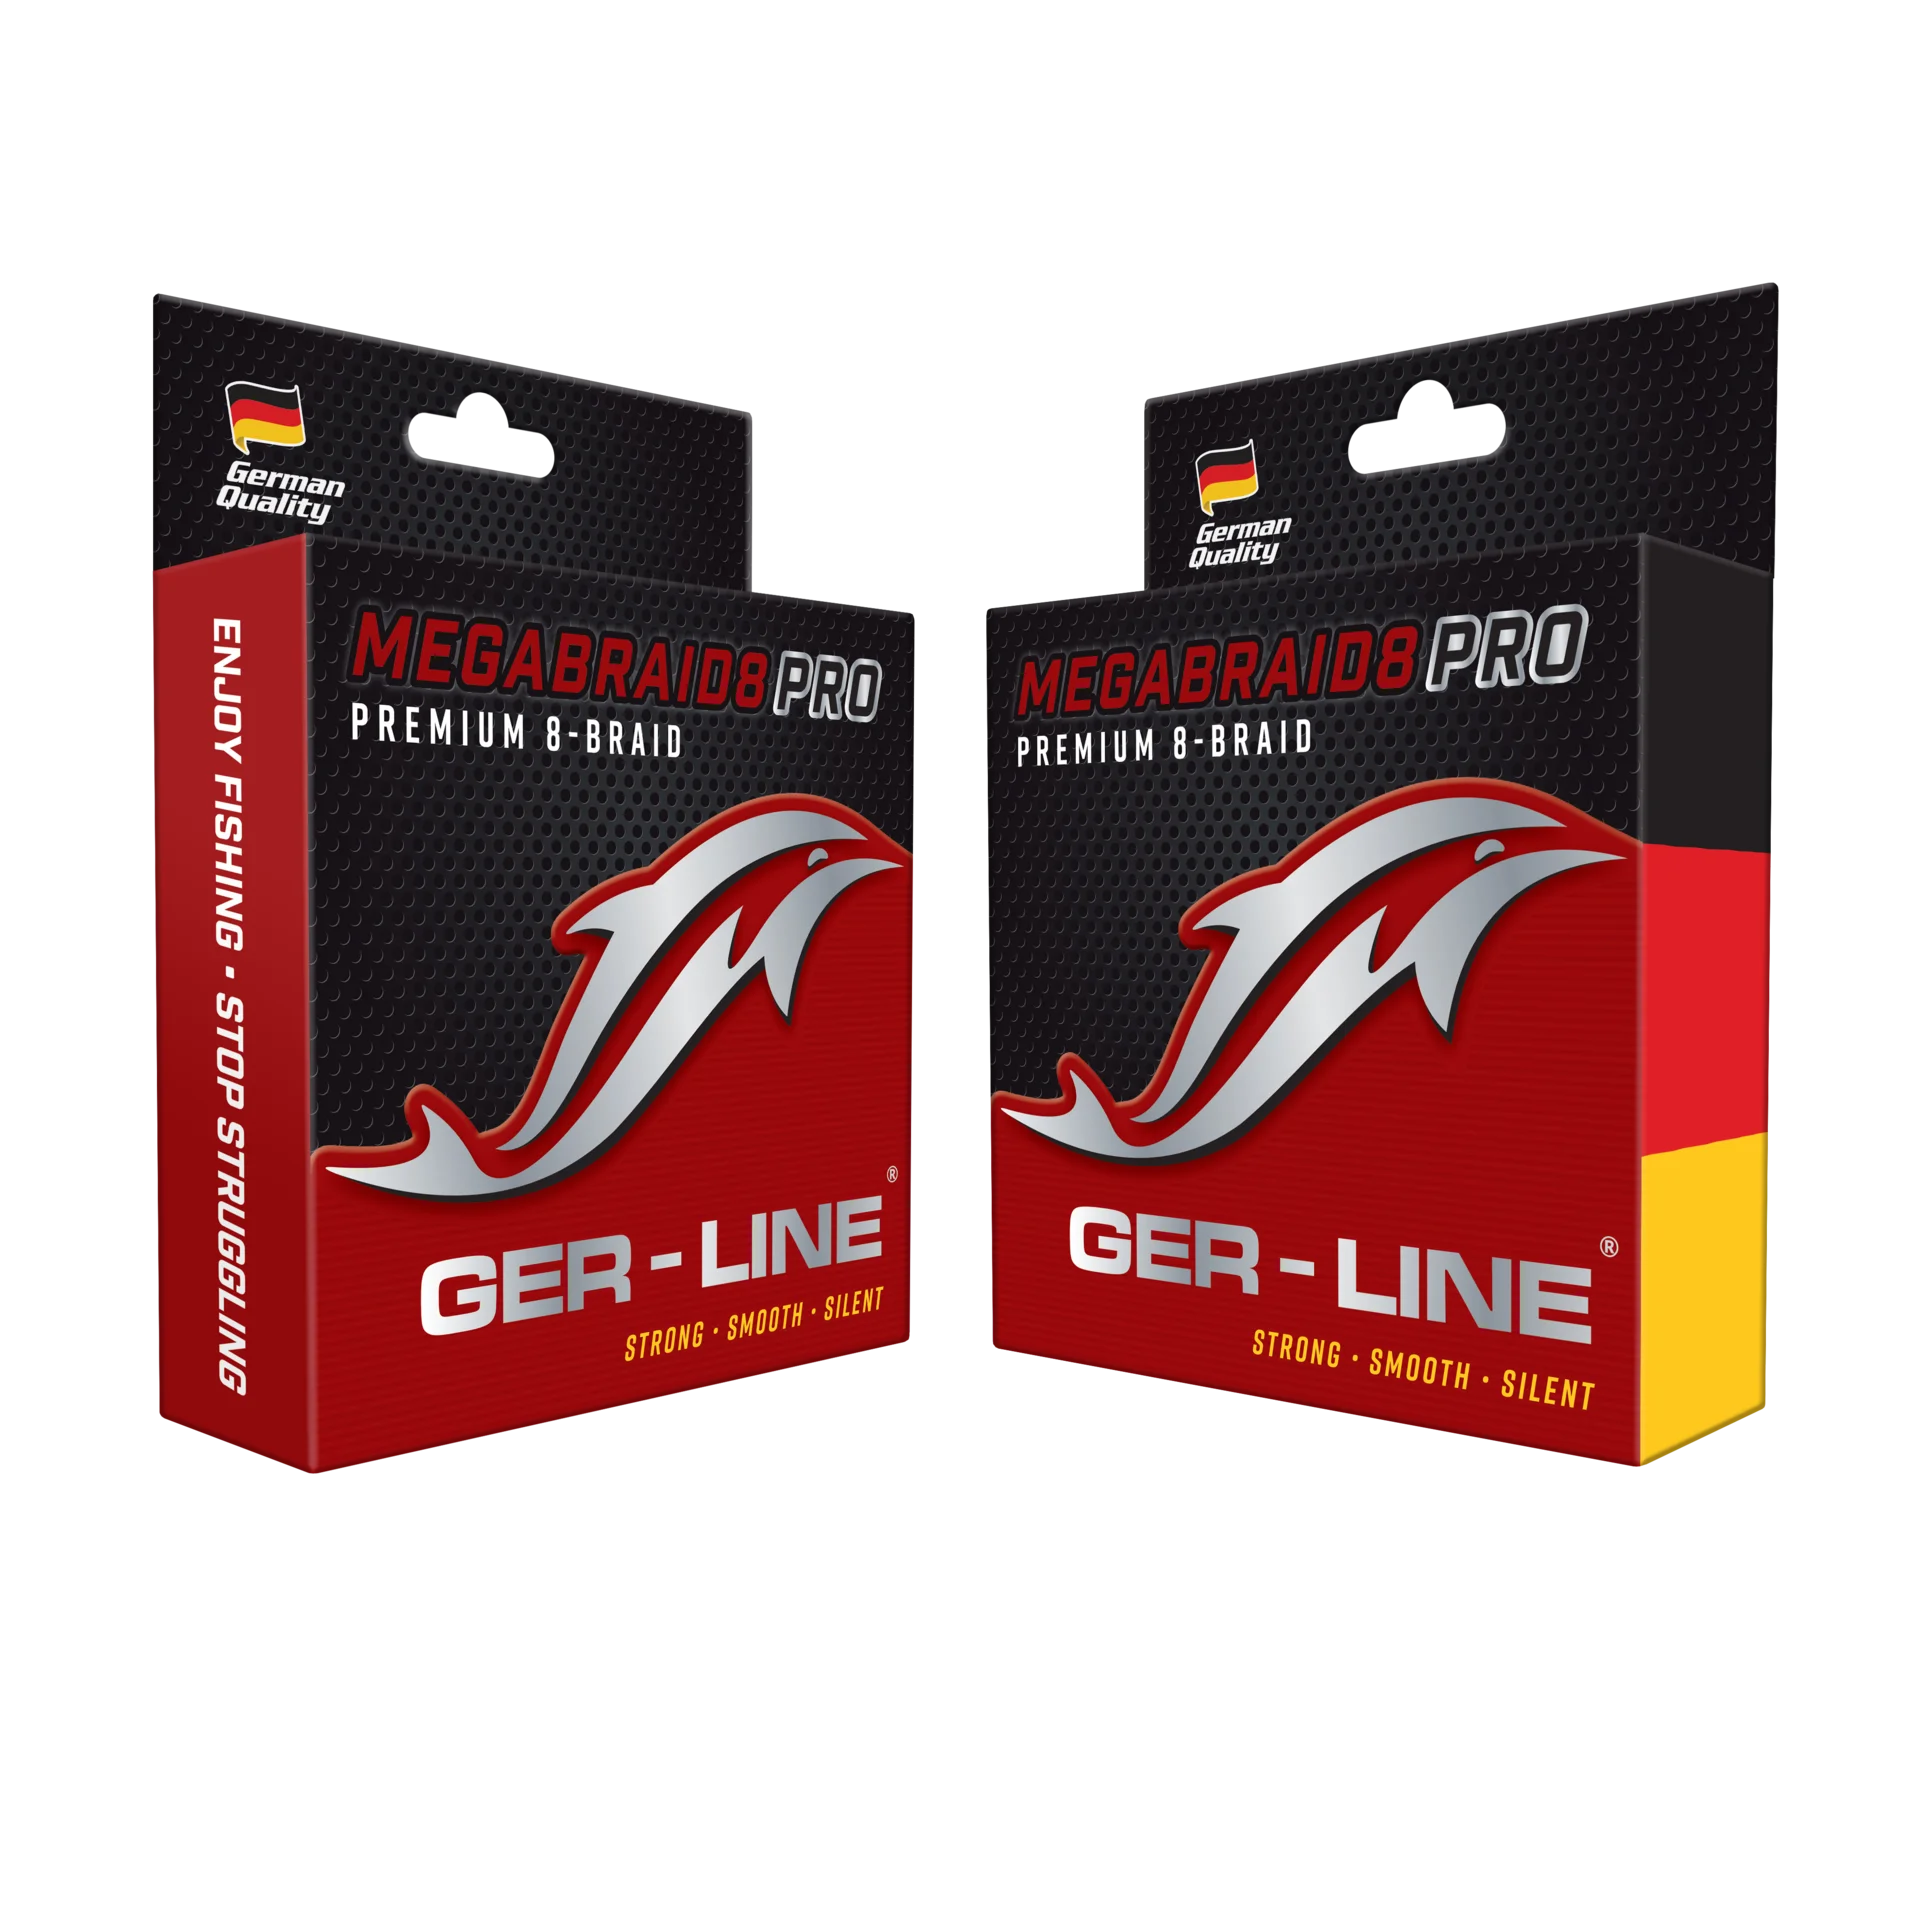 The Best Braided Fishing Line from Germany